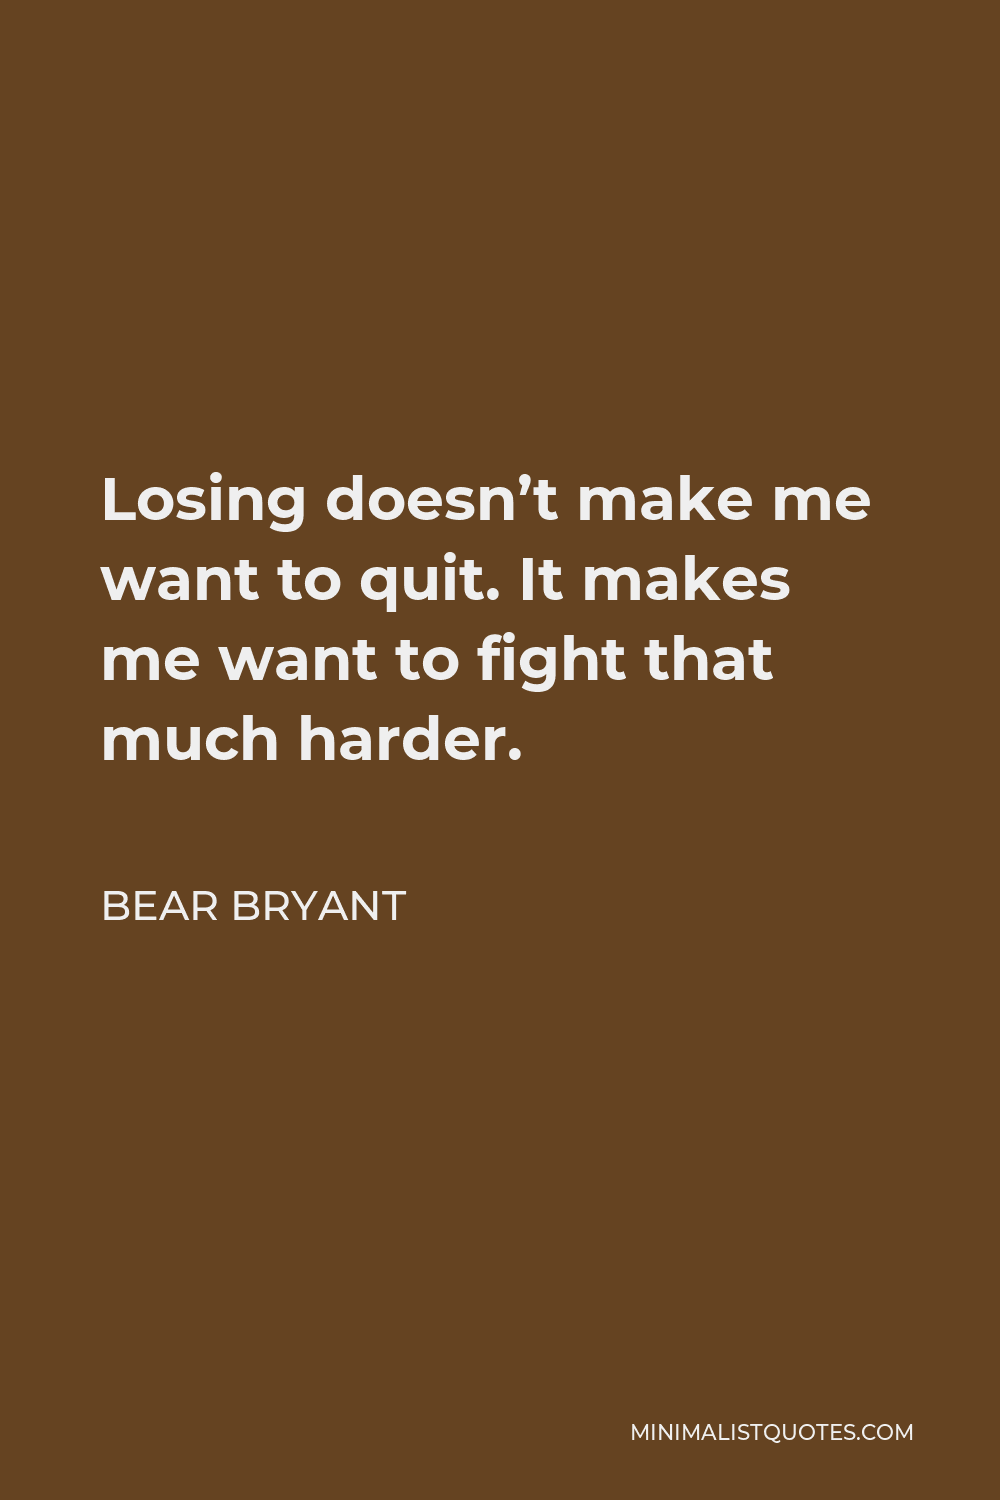 Bear Bryant Quote - Losing doesn’t make me want to quit. It makes me want to fight that much harder.